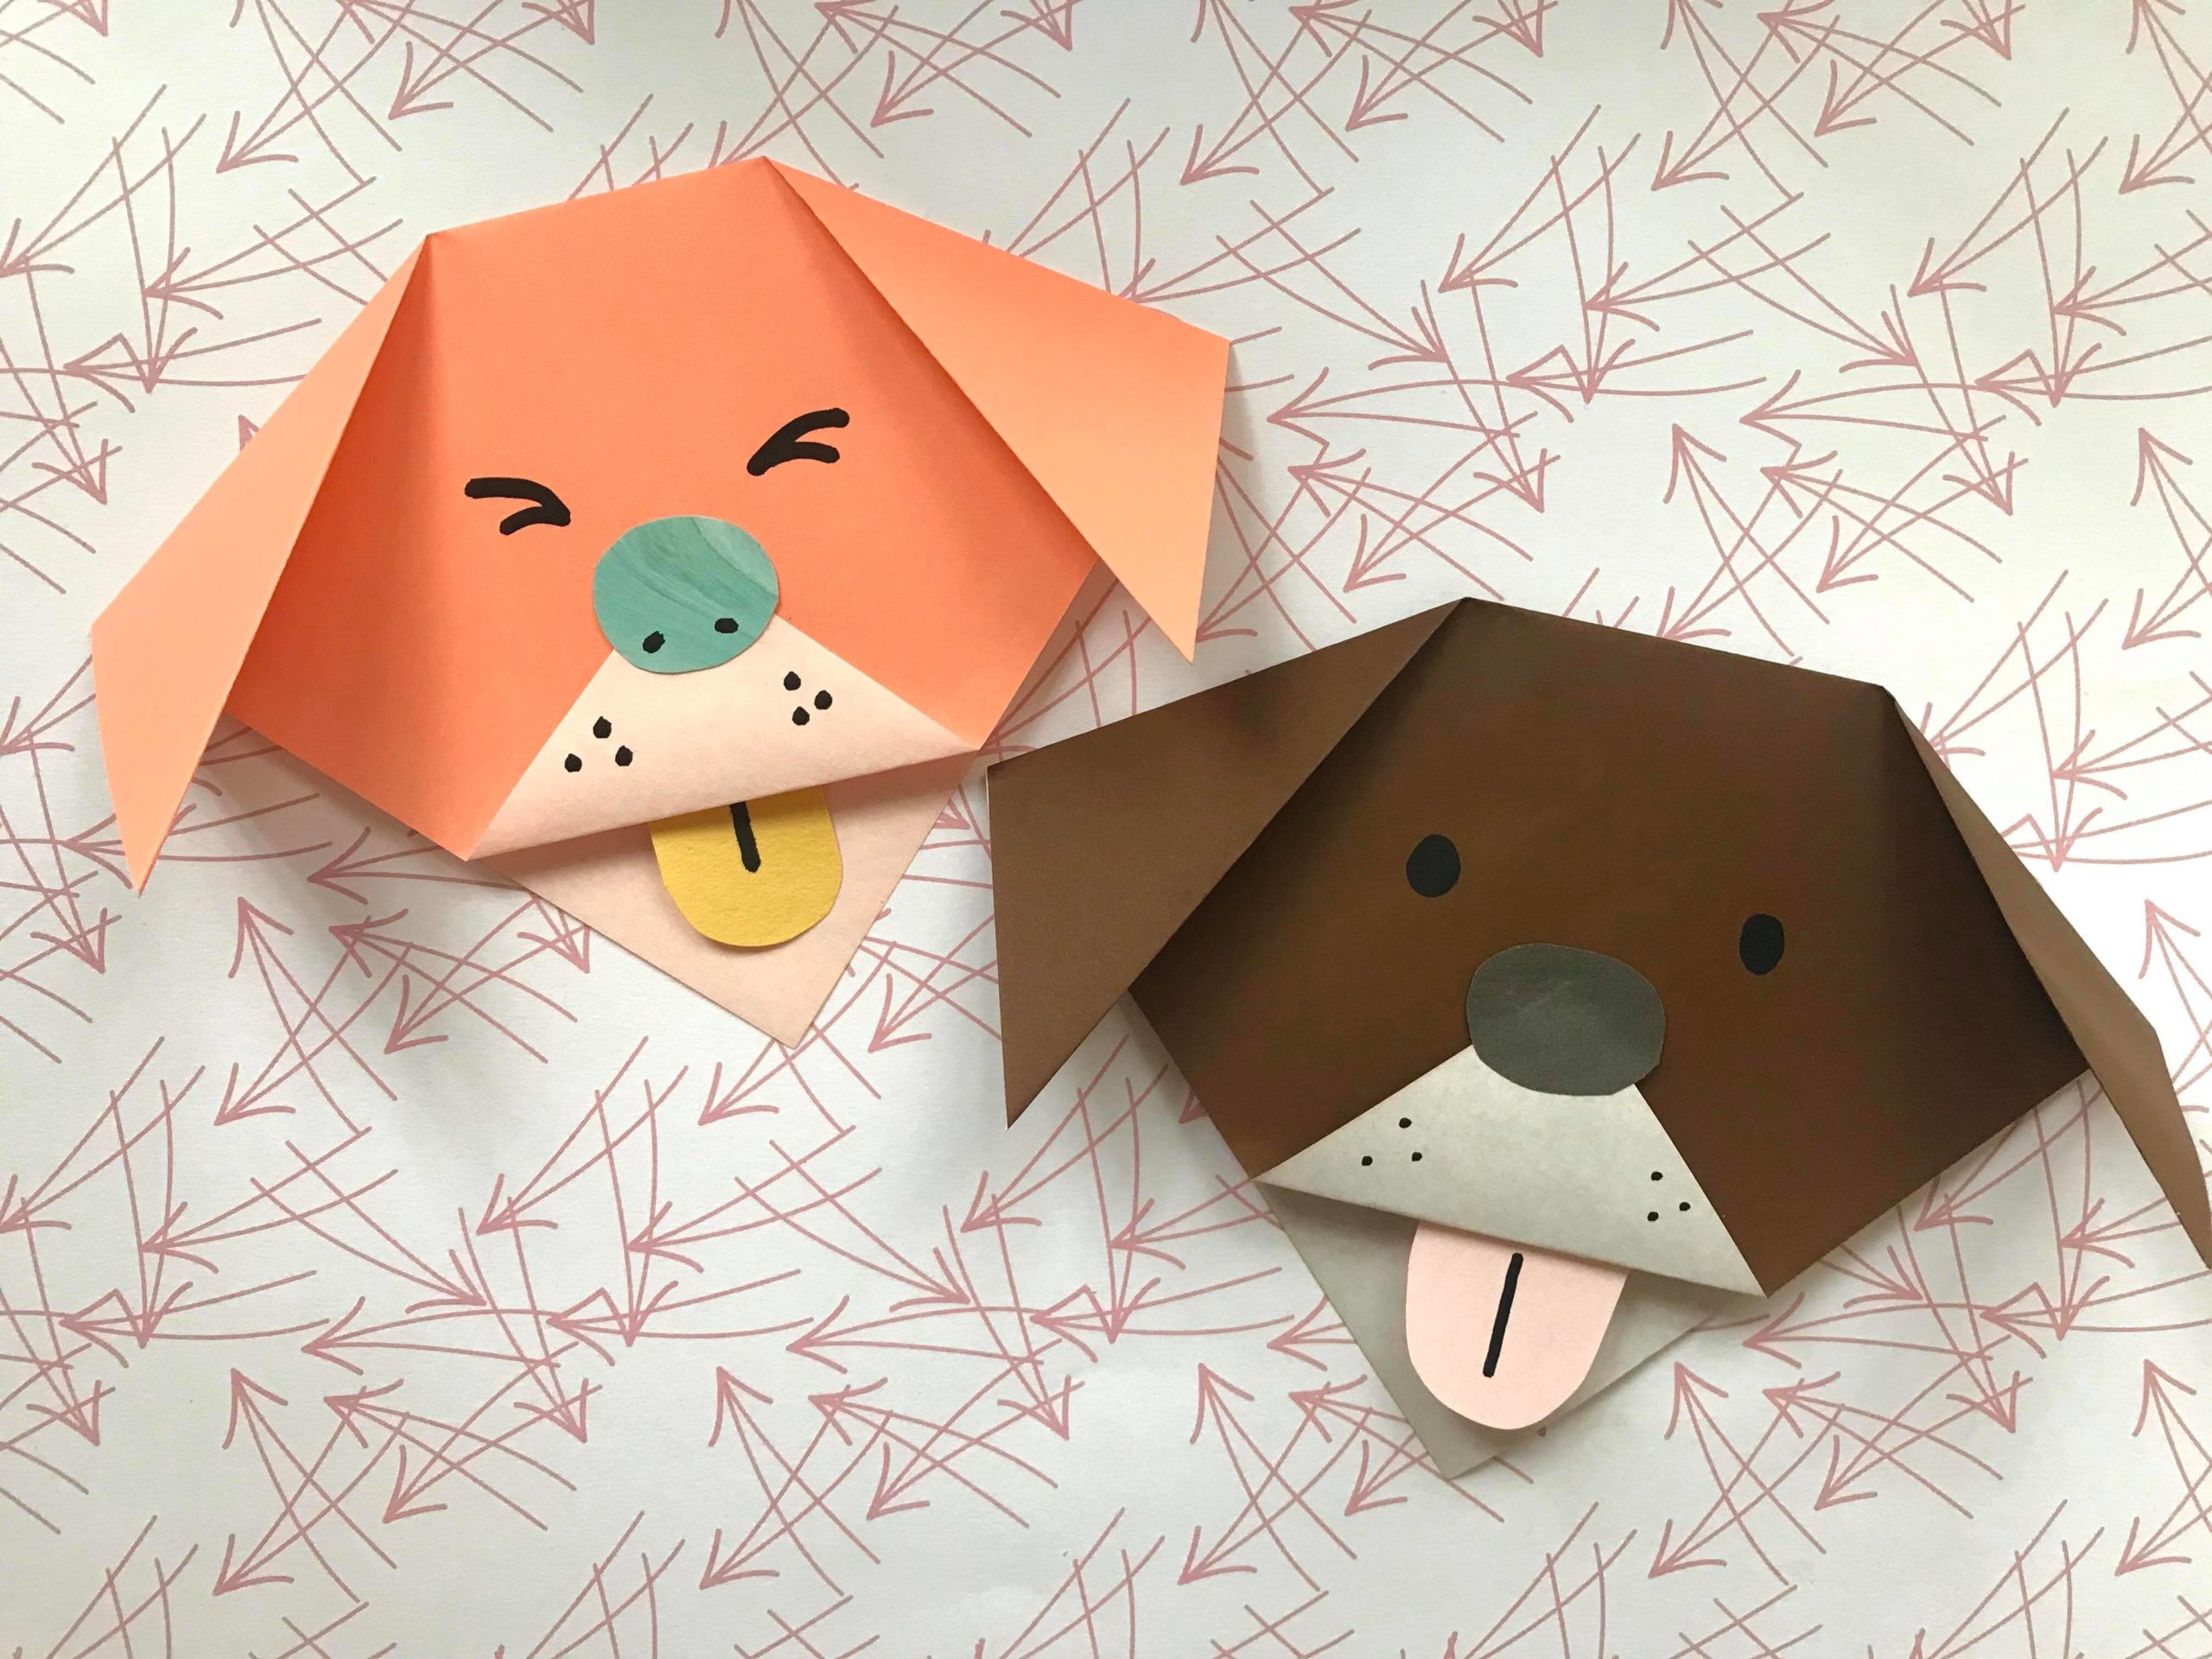 How do you make an origami dog step by step?